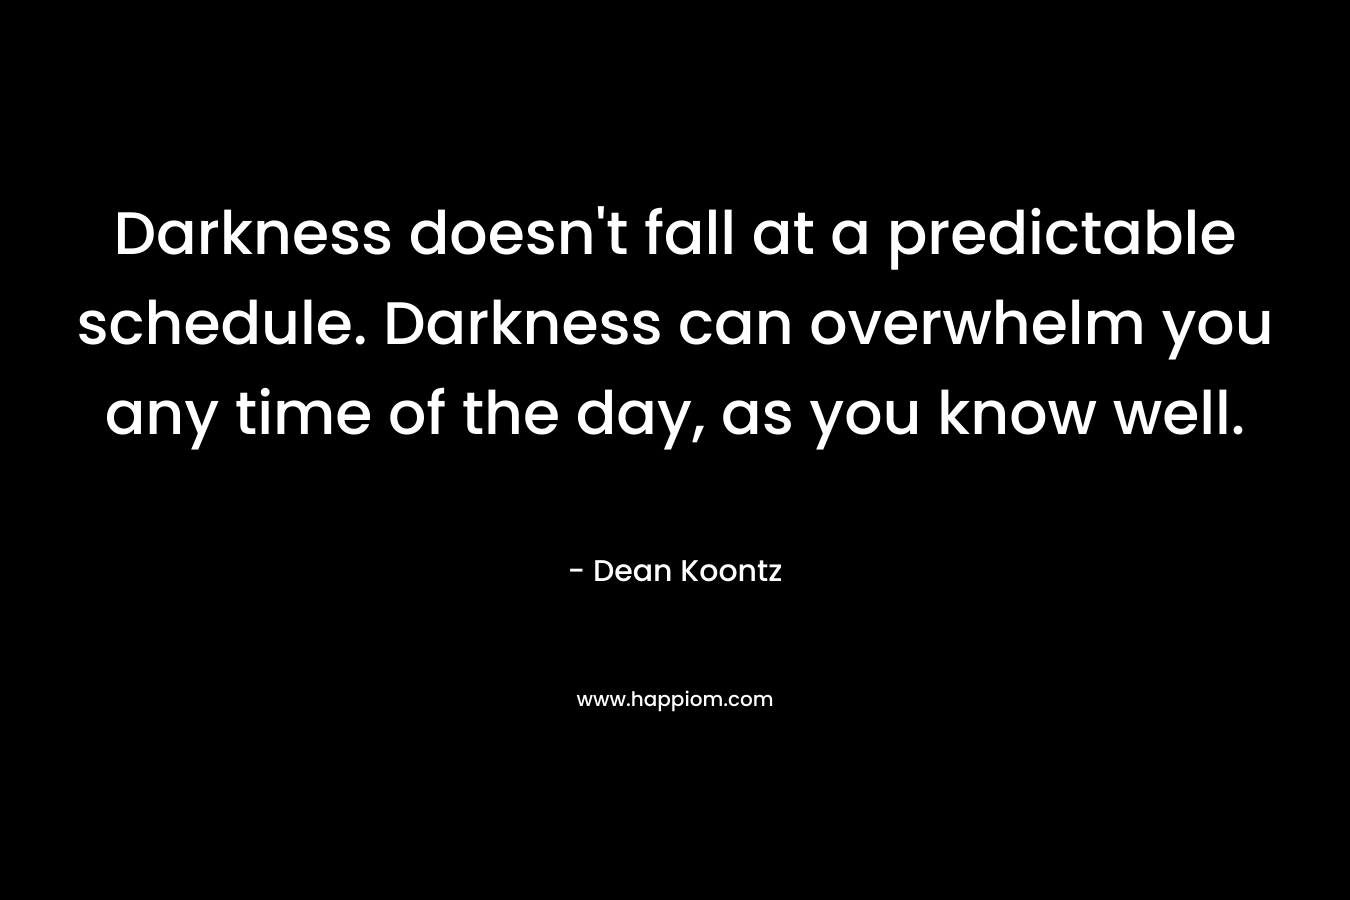 Darkness doesn’t fall at a predictable schedule. Darkness can overwhelm you any time of the day, as you know well. – Dean Koontz